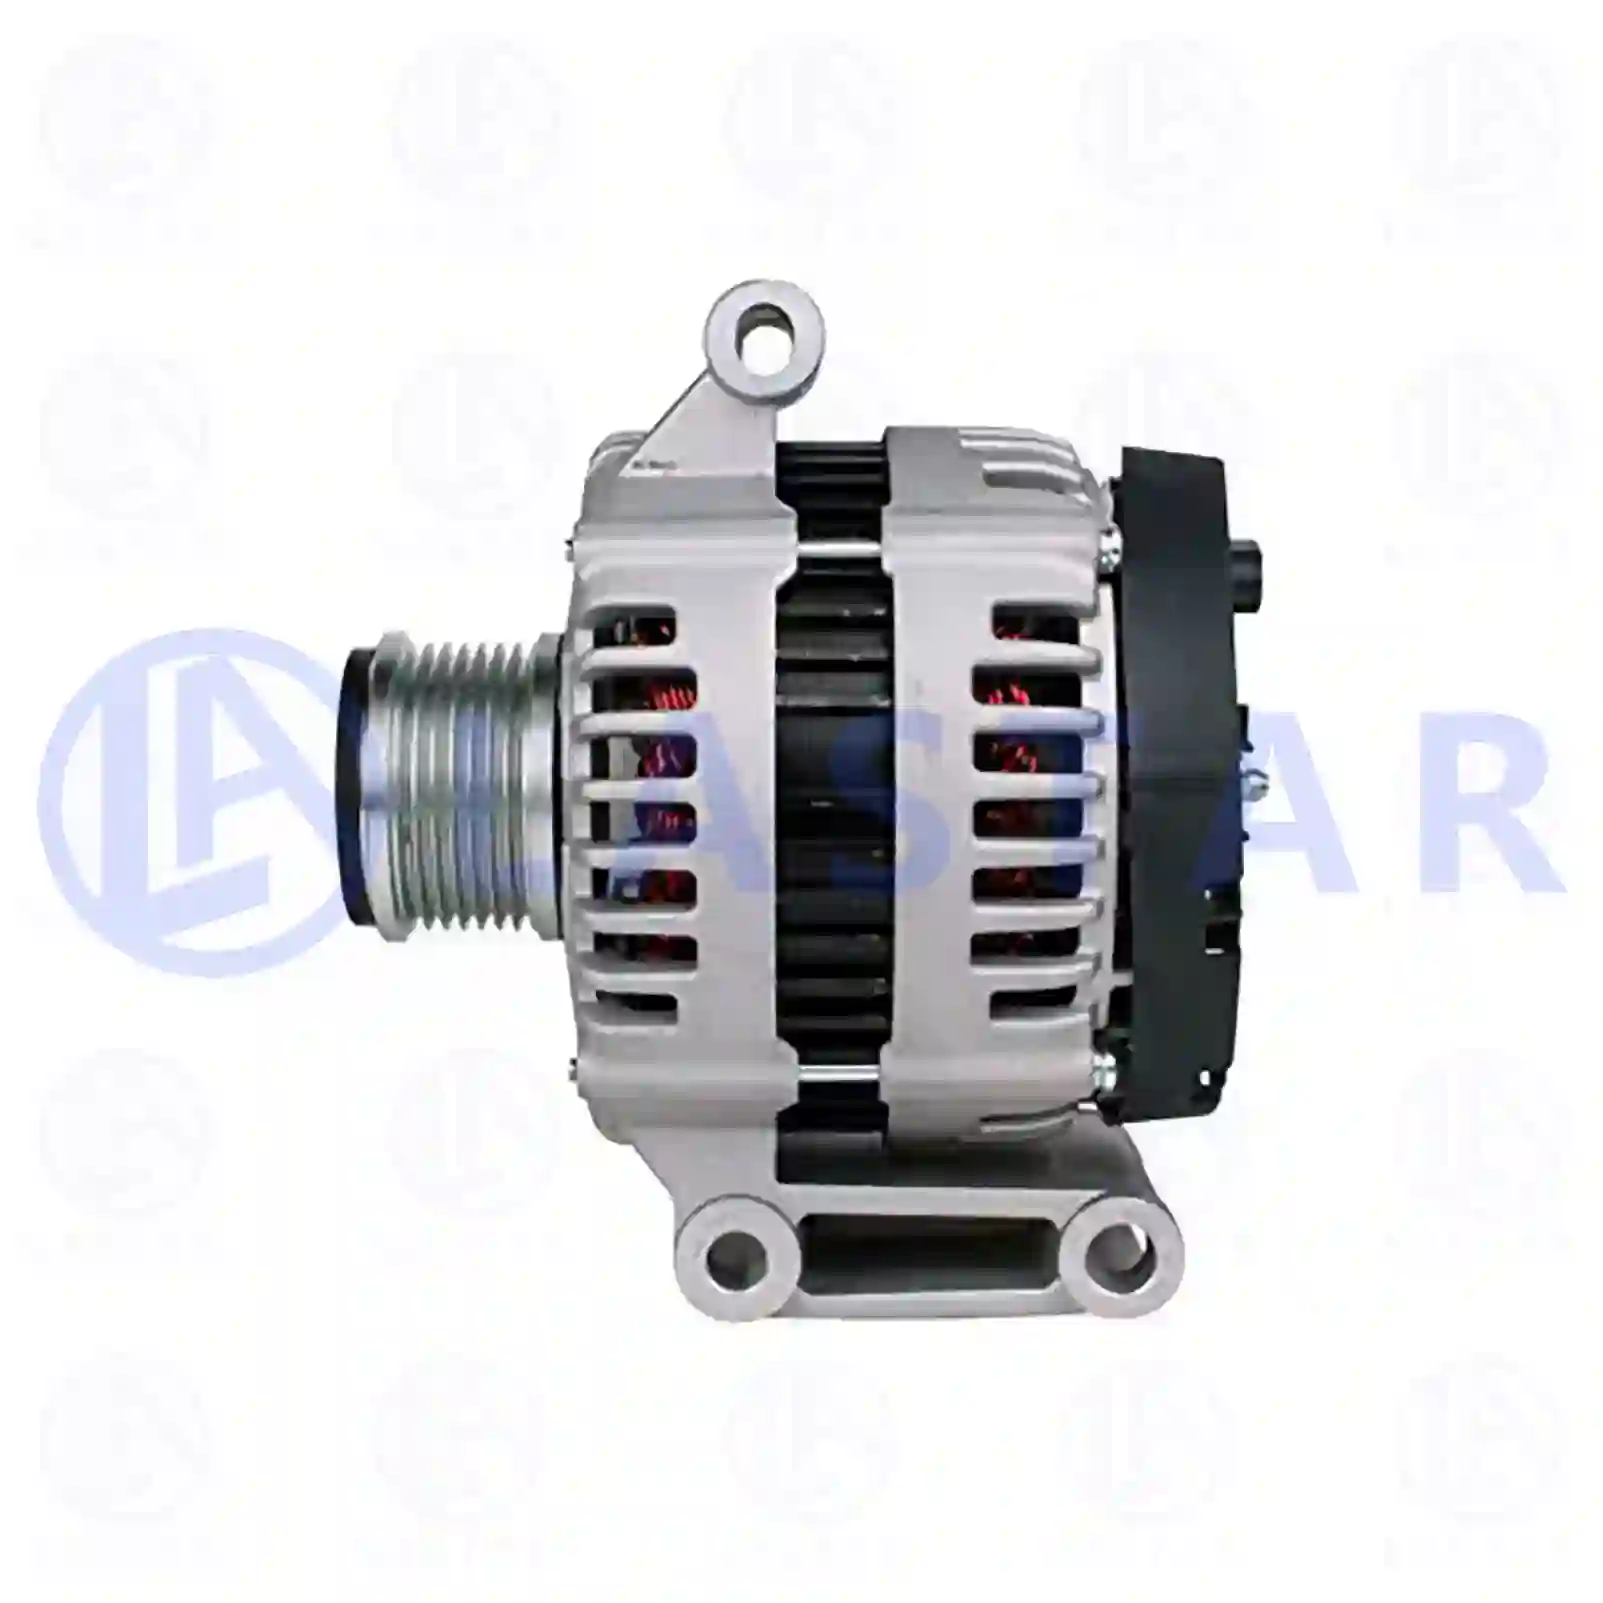 Alternator Alternator, without pulley, la no: 77710028 ,  oem no:1372737, 1404792, 1581844, 2097255, 6C1T-10300-CA, 6C1T-10300-CB, 6C1T-10300-CC, 6C1T-10300-CD, 7H12-10300-AA, 7H1210300AA, LR008856, YLE500310, 7H1210300AA, LR008856, YLE500310 Lastar Spare Part | Truck Spare Parts, Auotomotive Spare Parts